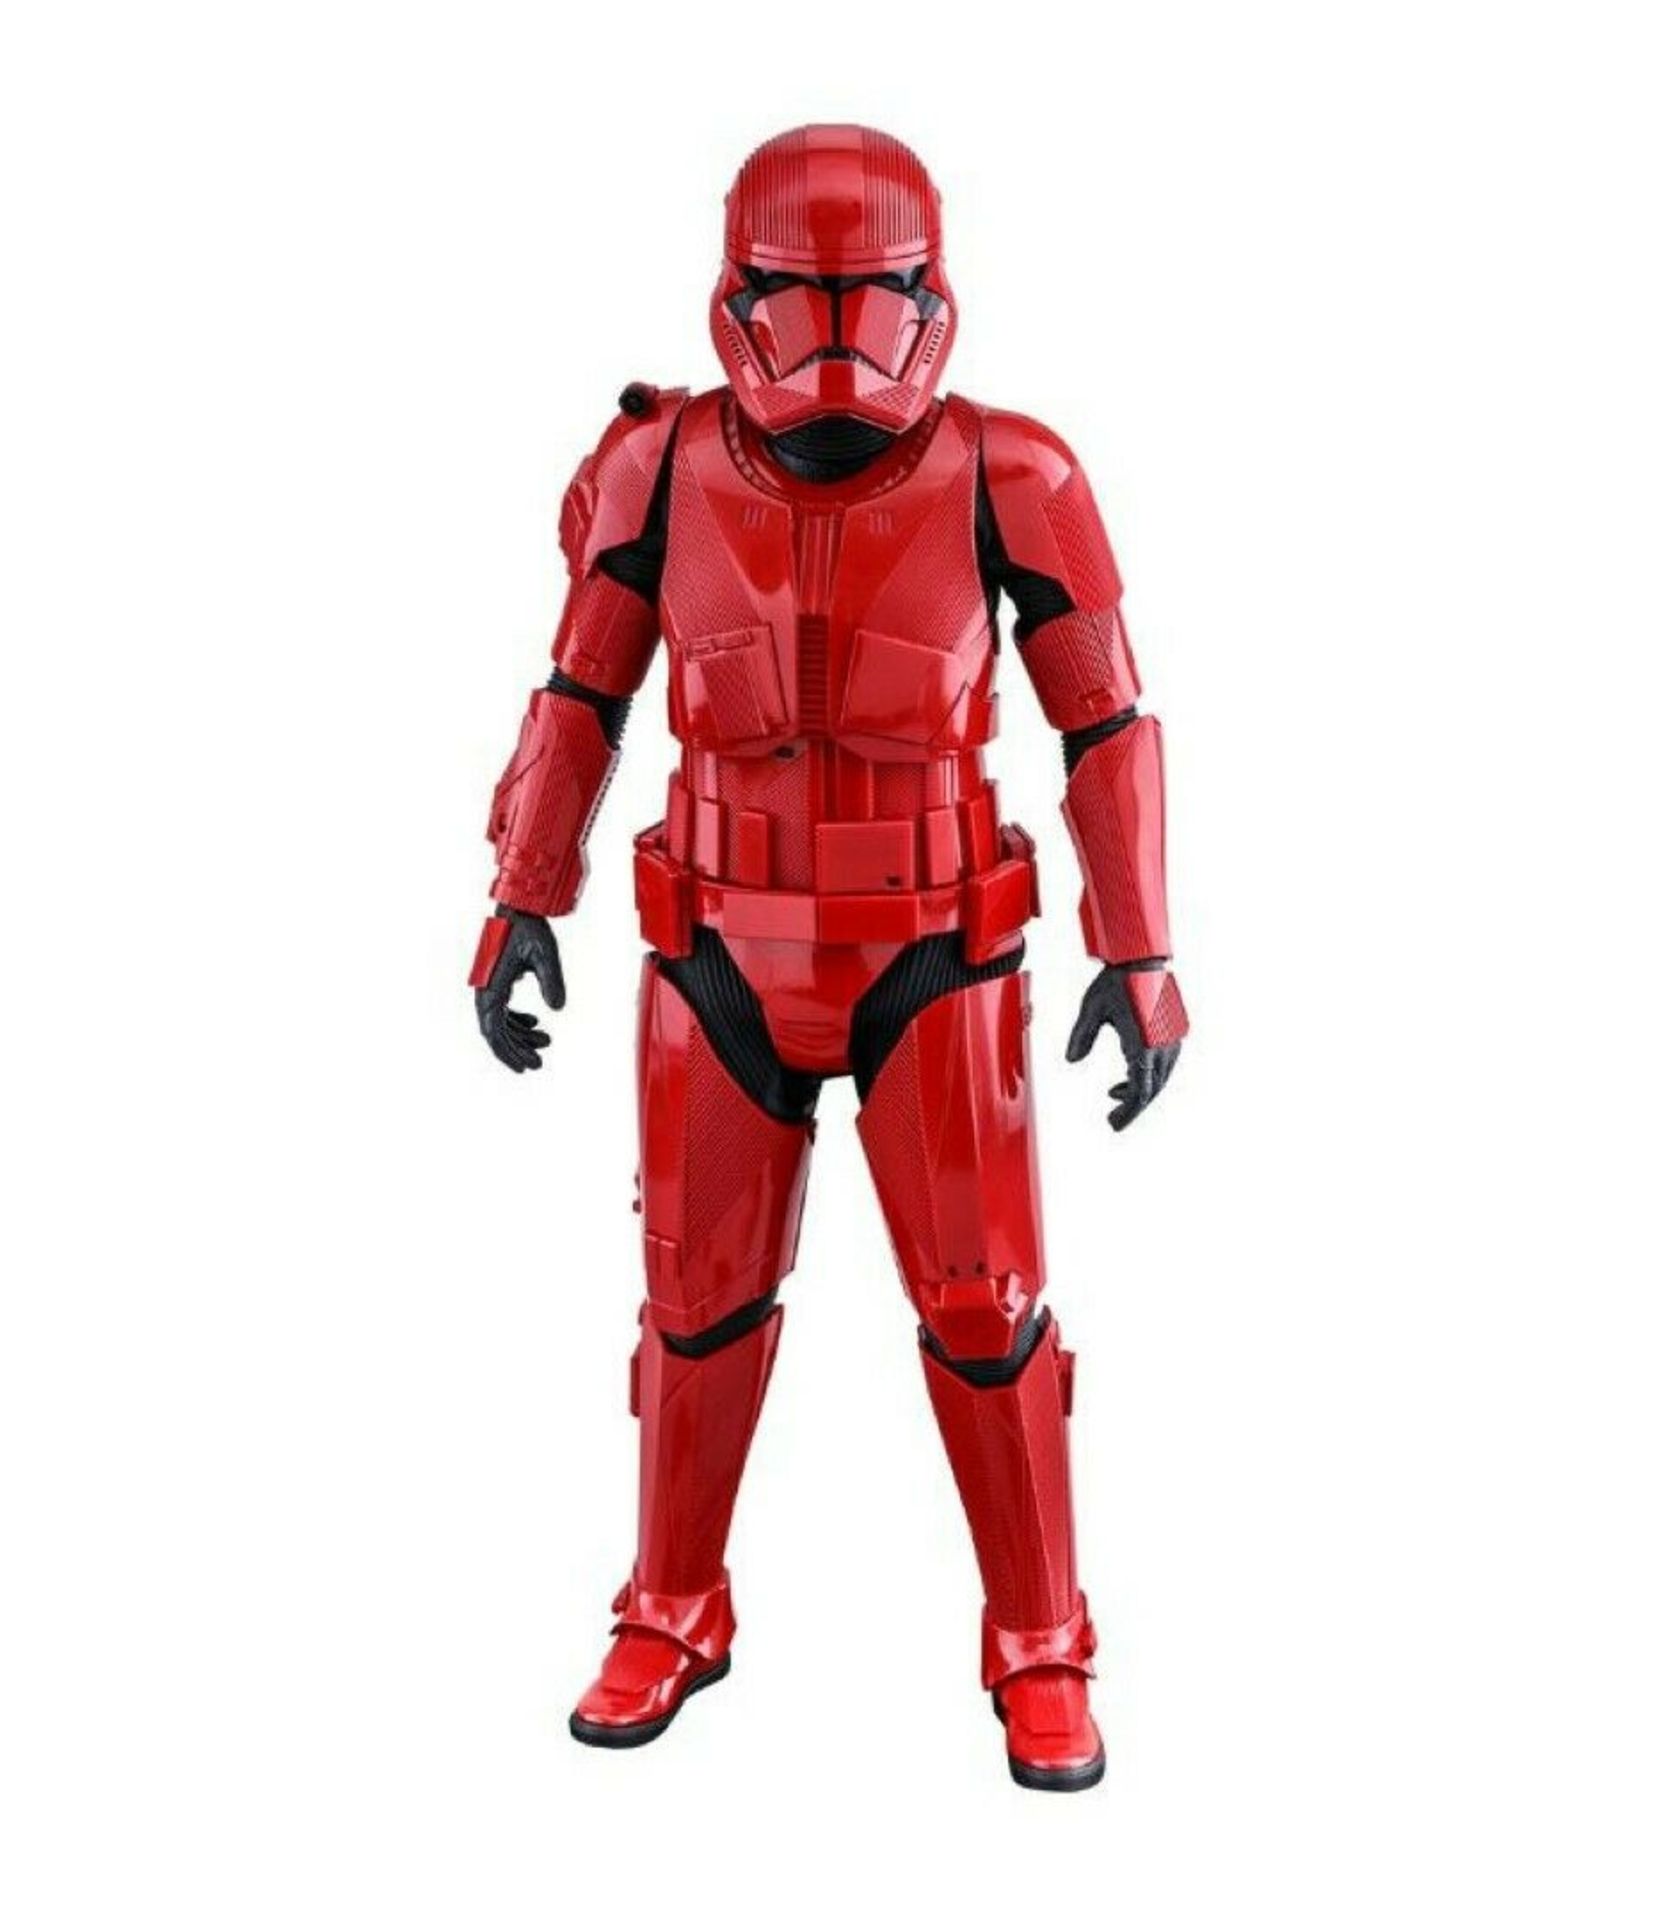 1 x Official Hot Toys Star Wars Rise of Skywalker Exclusive Sith Trooper 1/6 Scale Figure - MMS544 - - Image 2 of 3